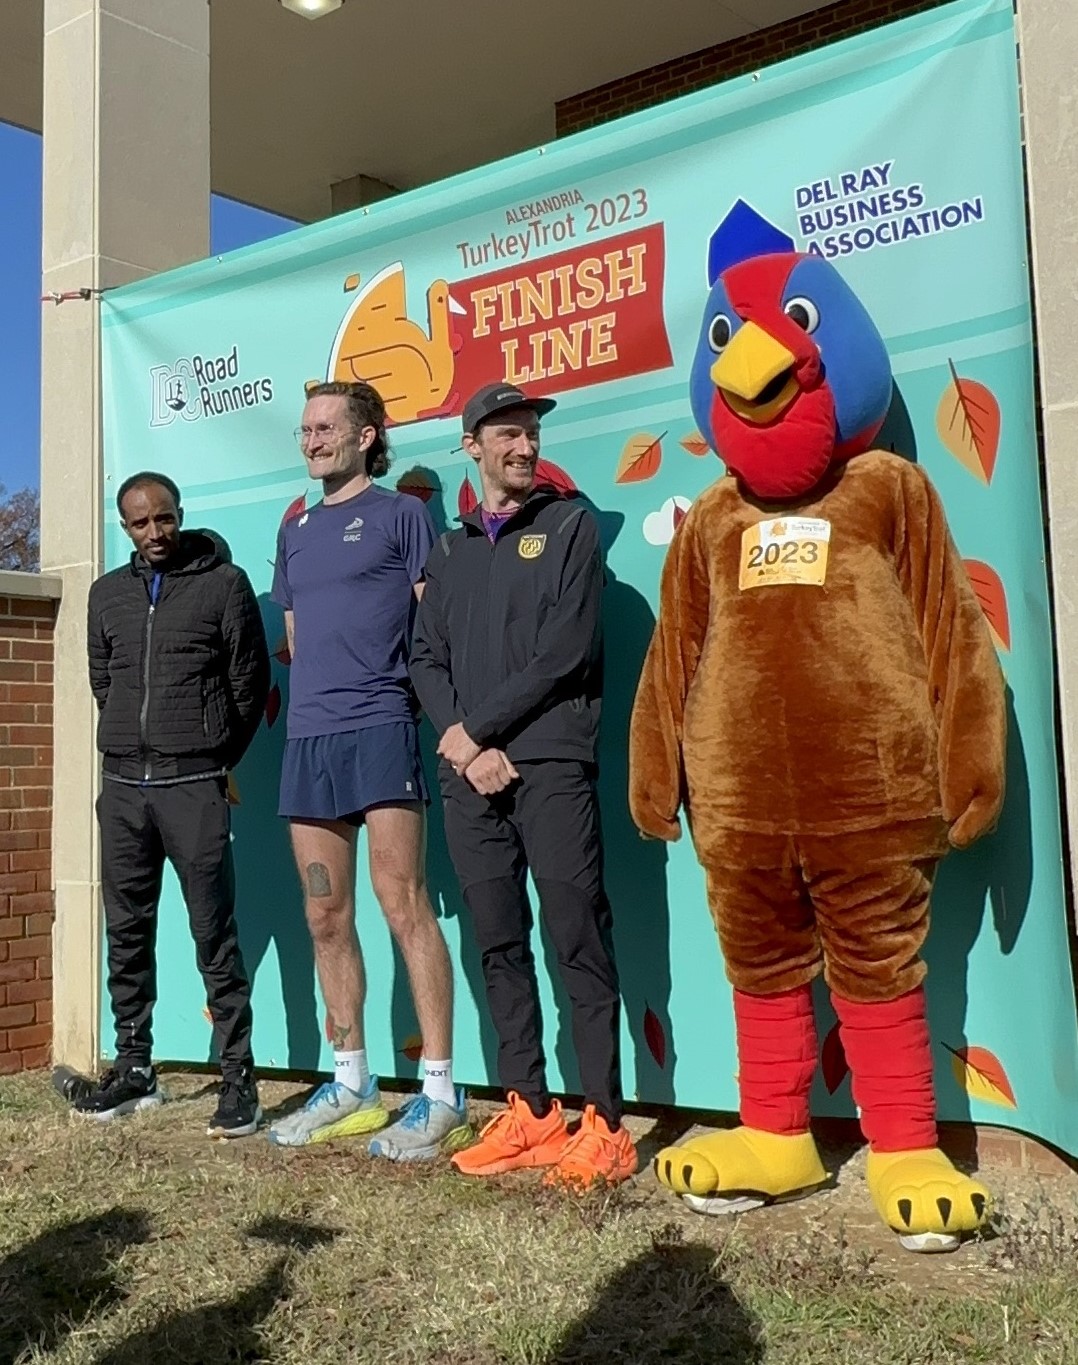 Three people and a big turkey mascot stand in front of a green finish line banner.